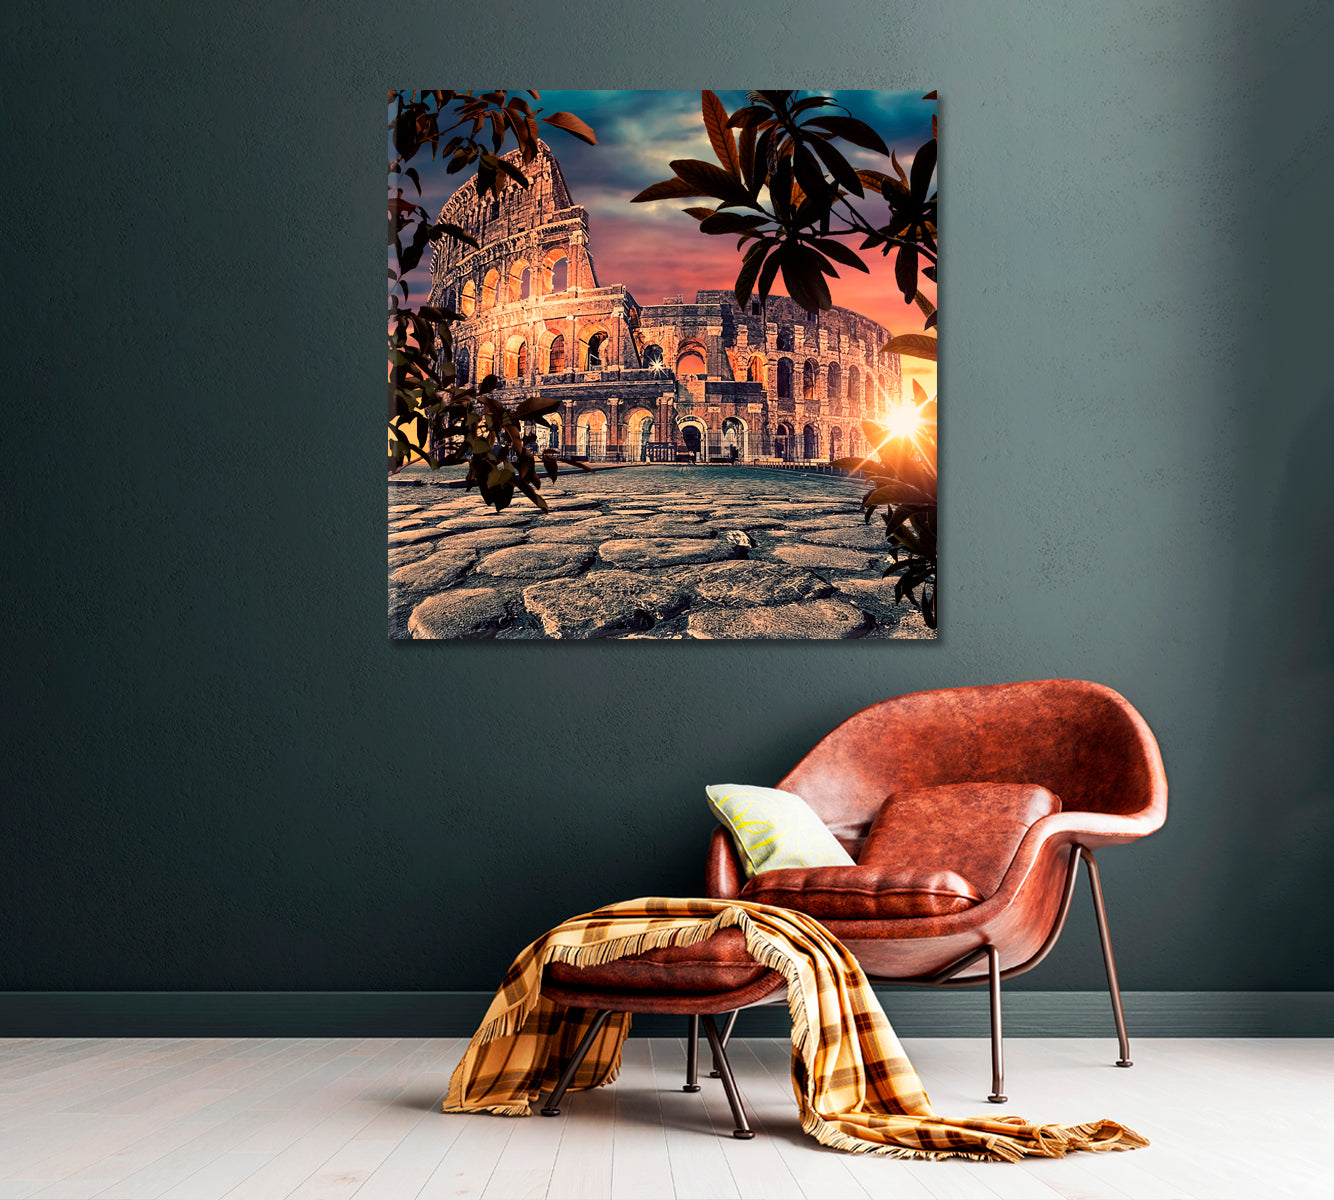 Colosseum in Rome Italy Canvas Print ArtLexy 1 Panel 12"x12" inches 